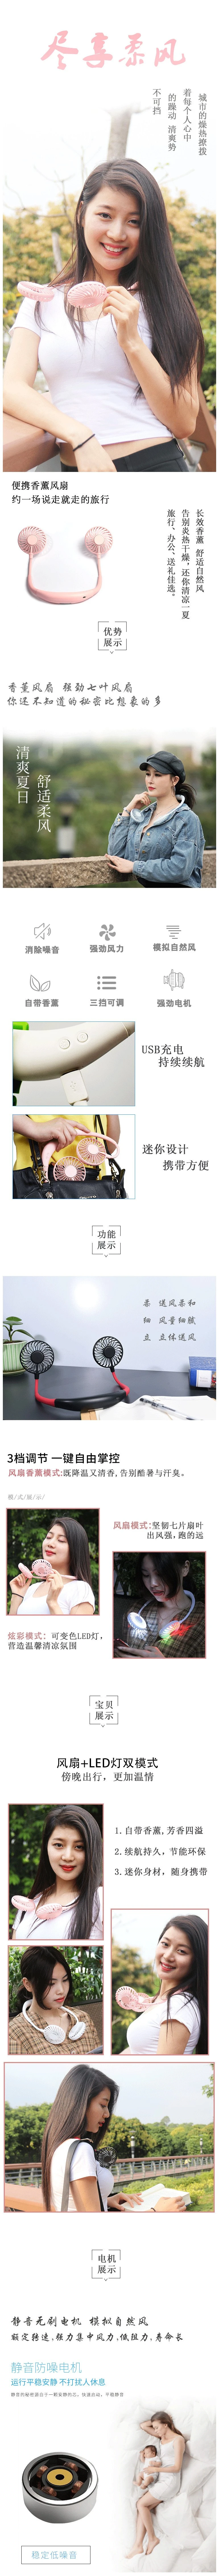 Air Cooler Air Home Appliance Ceiling Stand Electric Toy Candy Cooling Portable USB Rechargeable Tower Table (desk) Fan